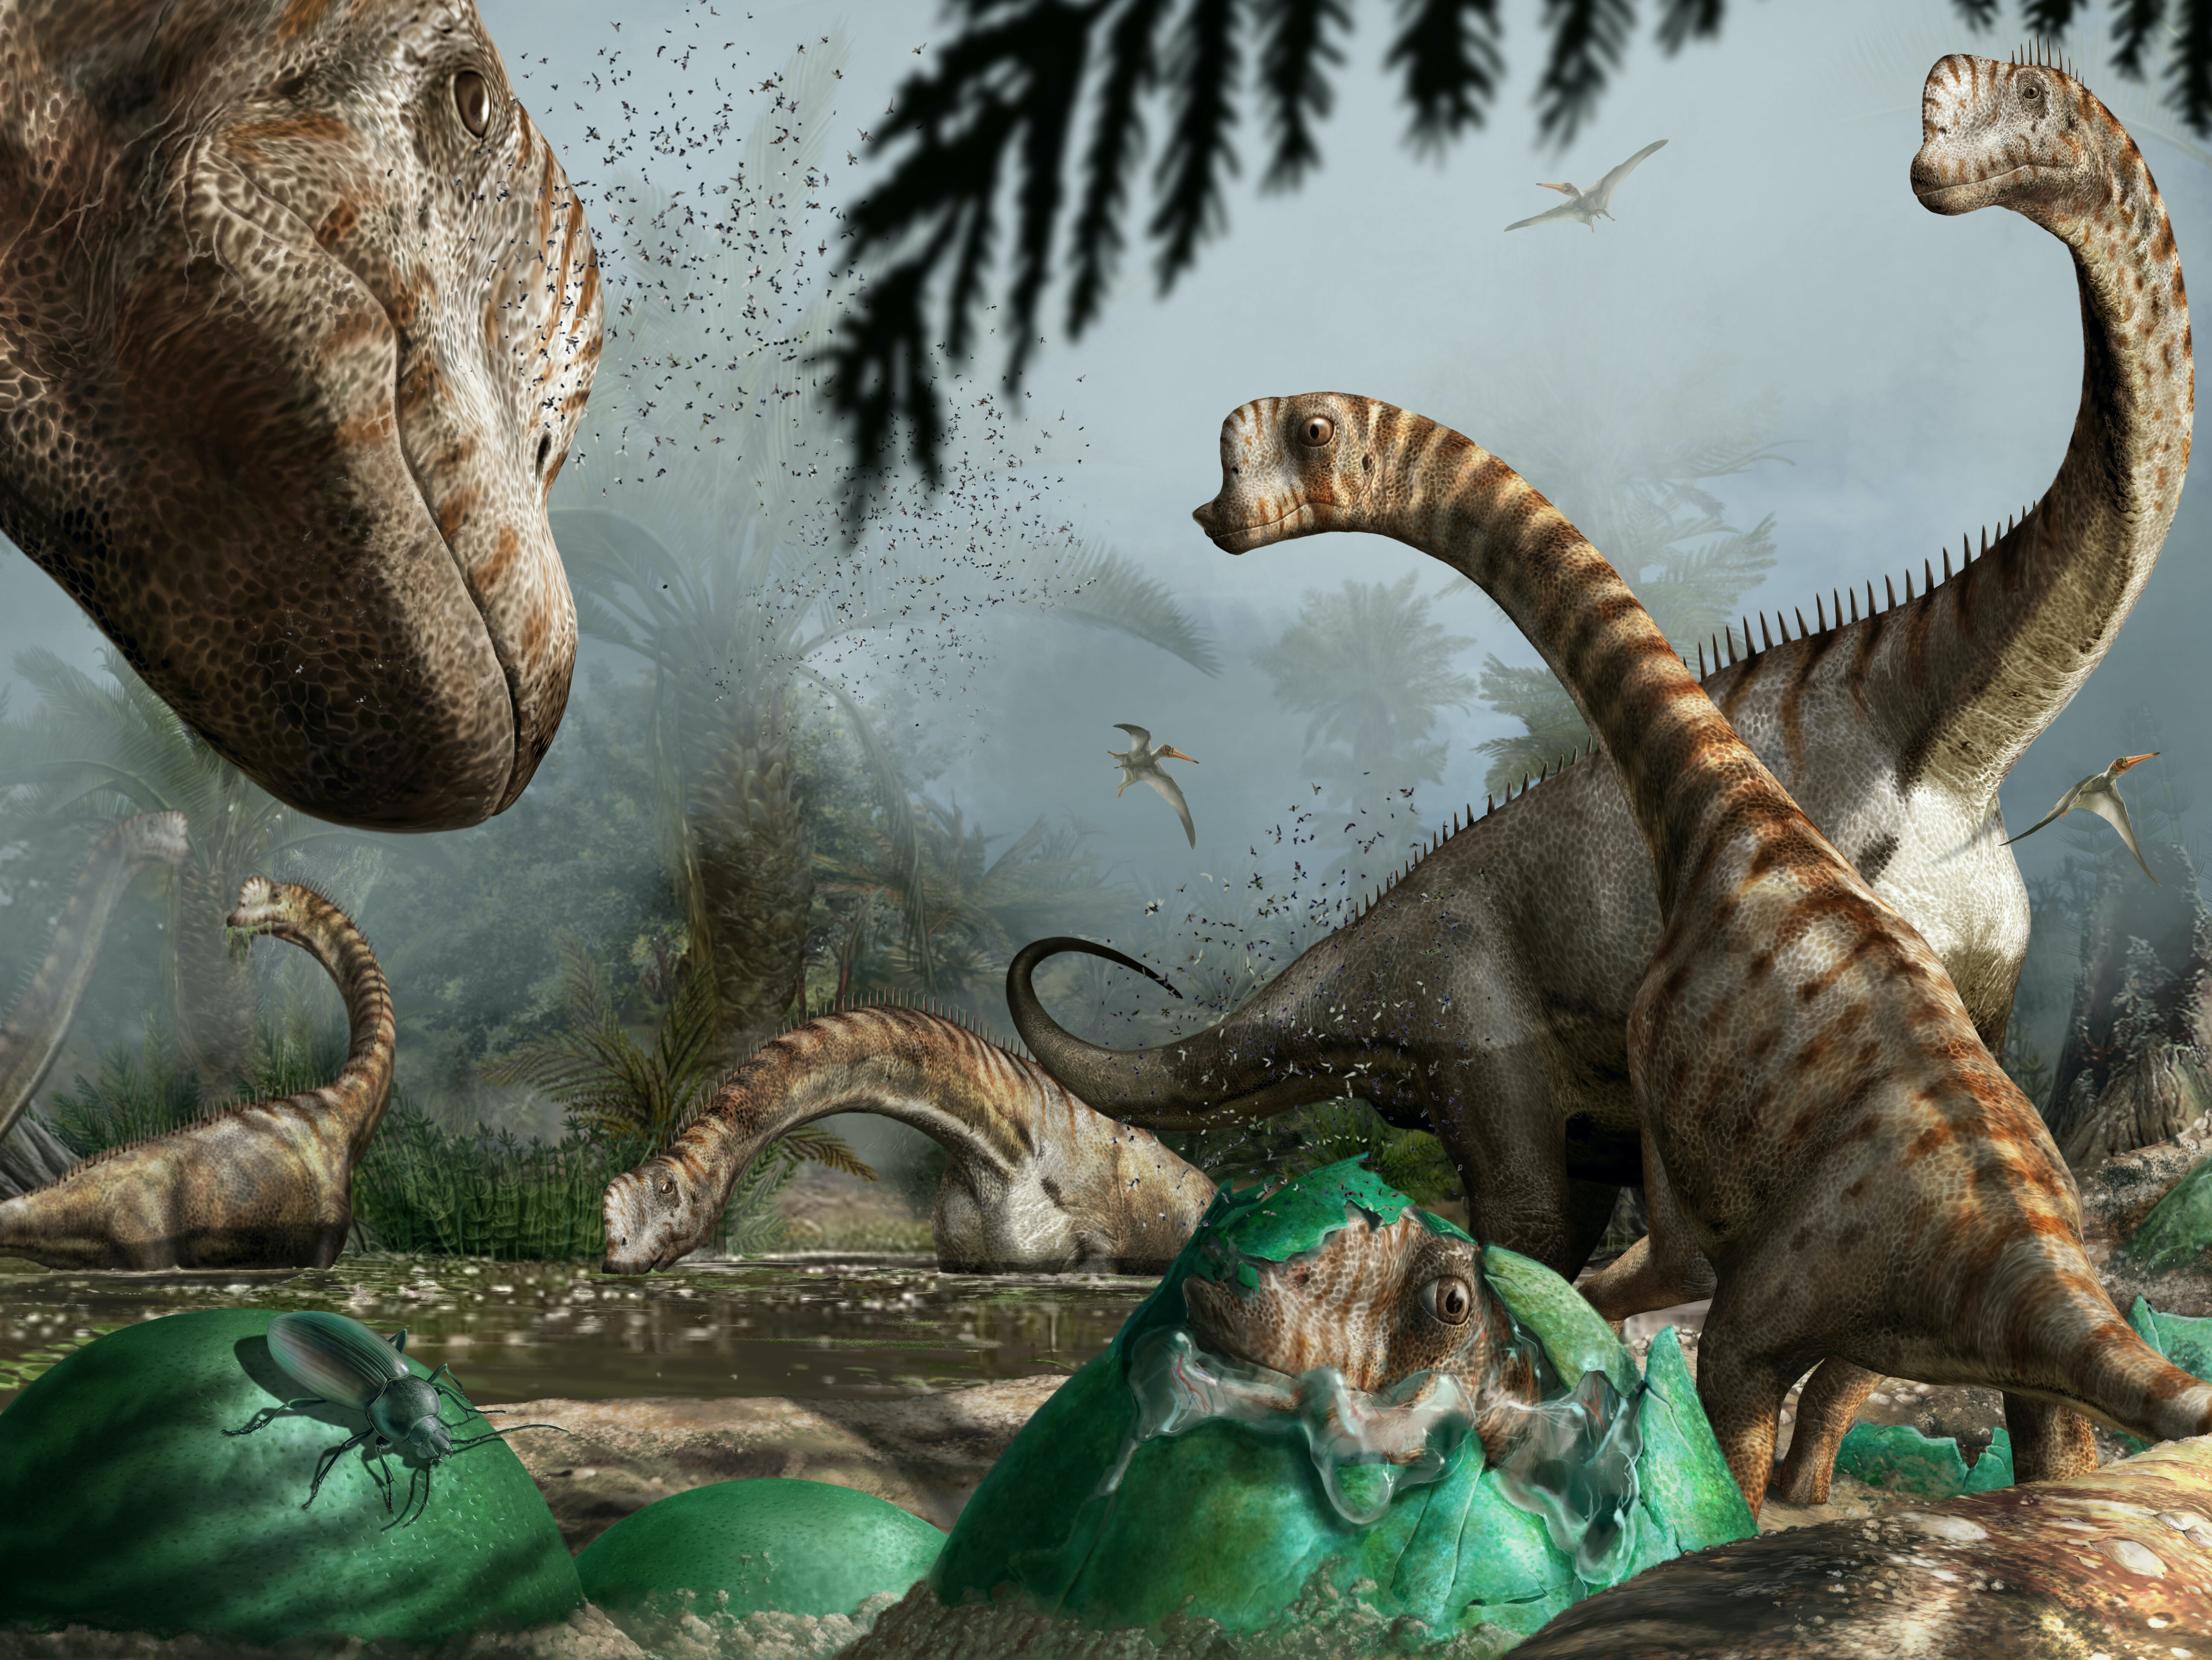 Germany 154 Ma ago: some adults watch over the newly-hatched Europasaurus chicks which are leaving the nest to join their herd. Commissioned artwork by © Davide Bonadonna 